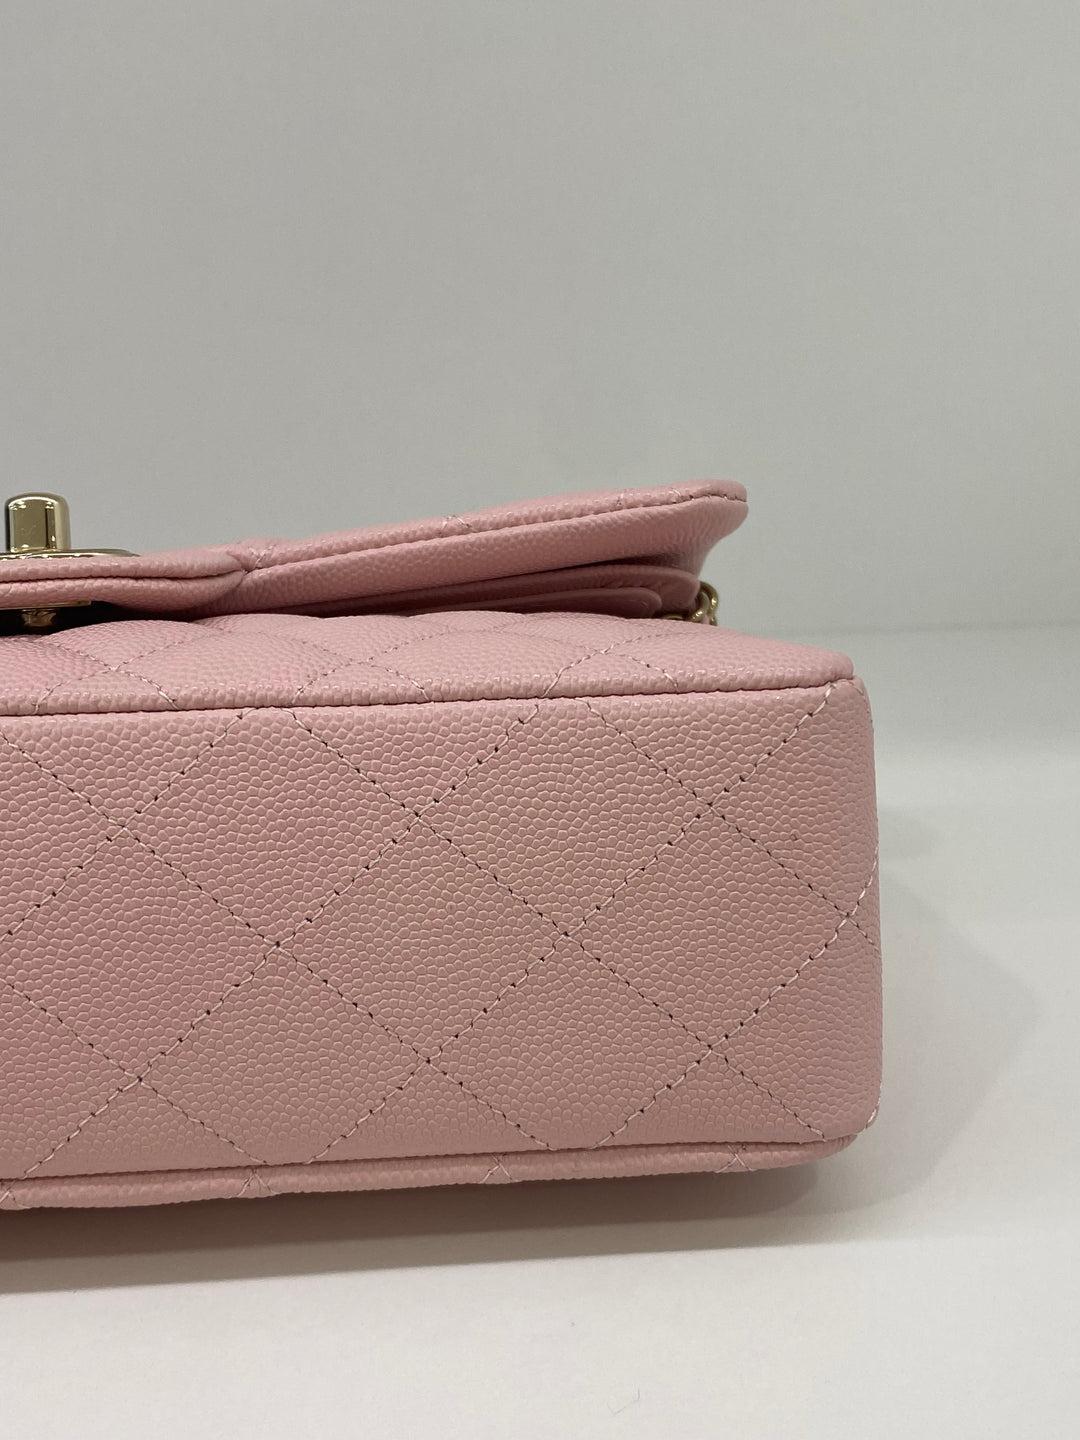 Chanel Classic Flap Small Soft Pink CGHW 7